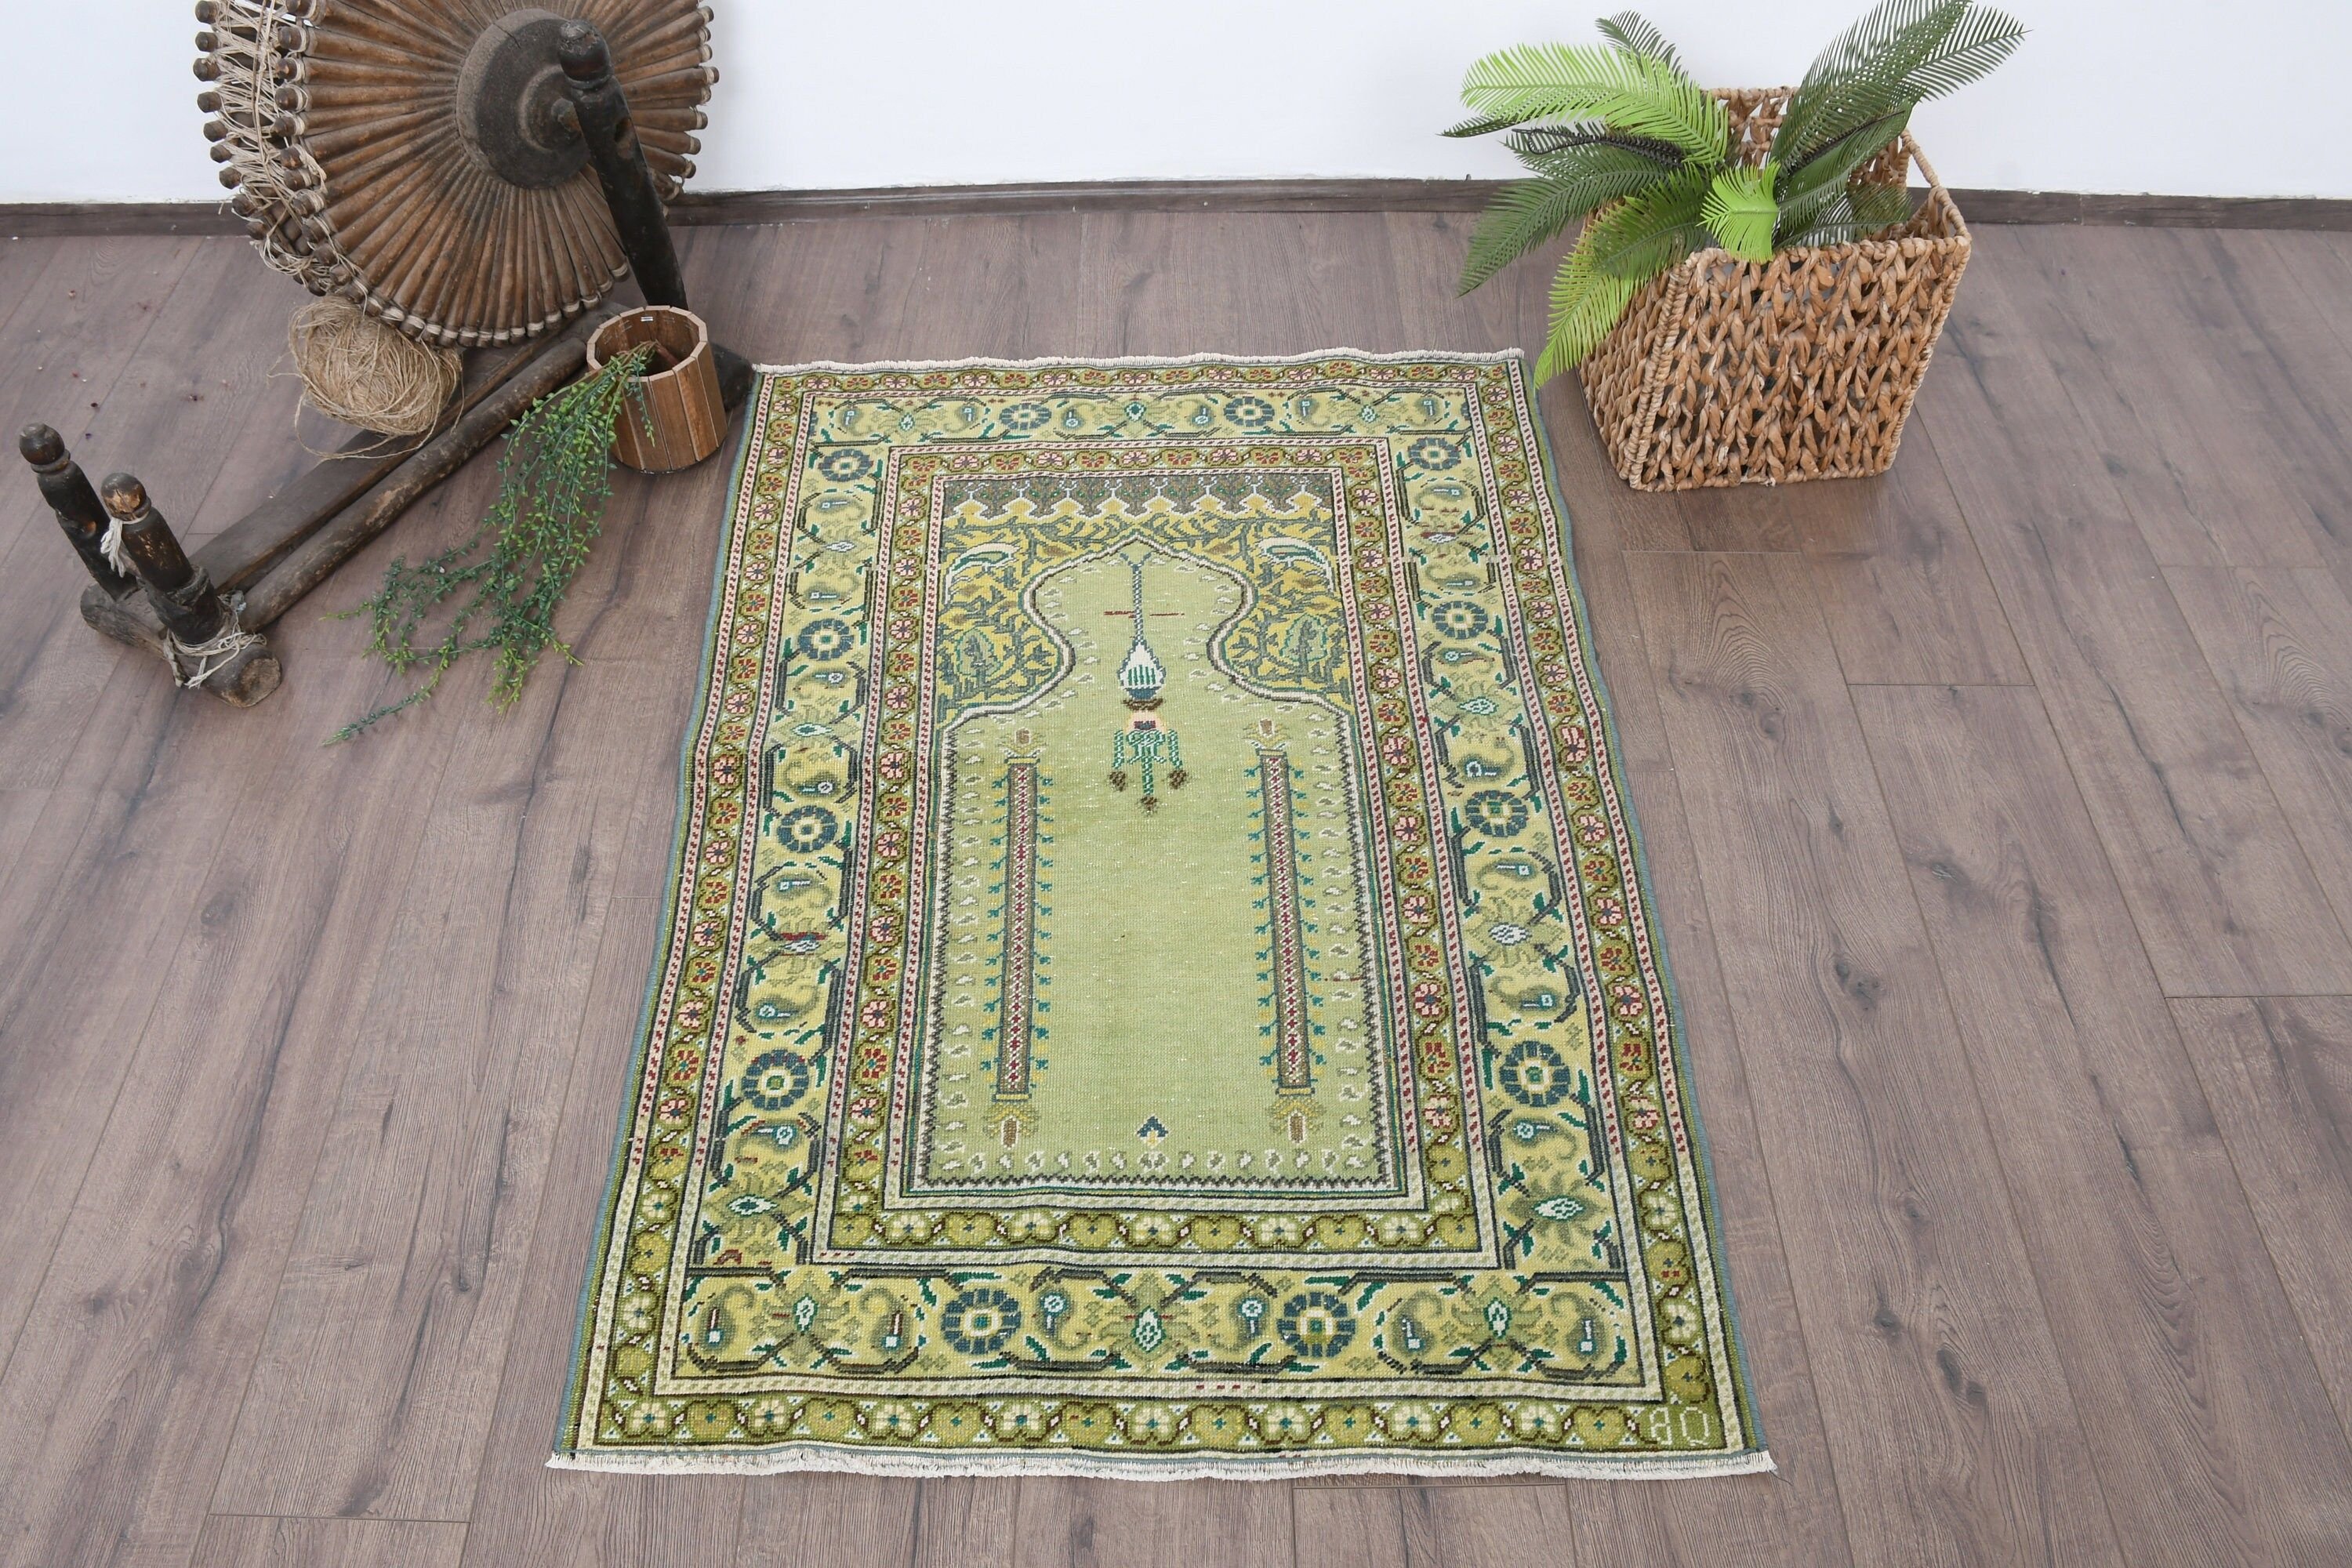 Antique Rugs, Turkish Rug, 2.8x4.1 ft Small Rug, Vintage Rug, Rugs for Kitchen, Green Bedroom Rugs, Hand Knotted Rug, Oushak Rugs, Bath Rug